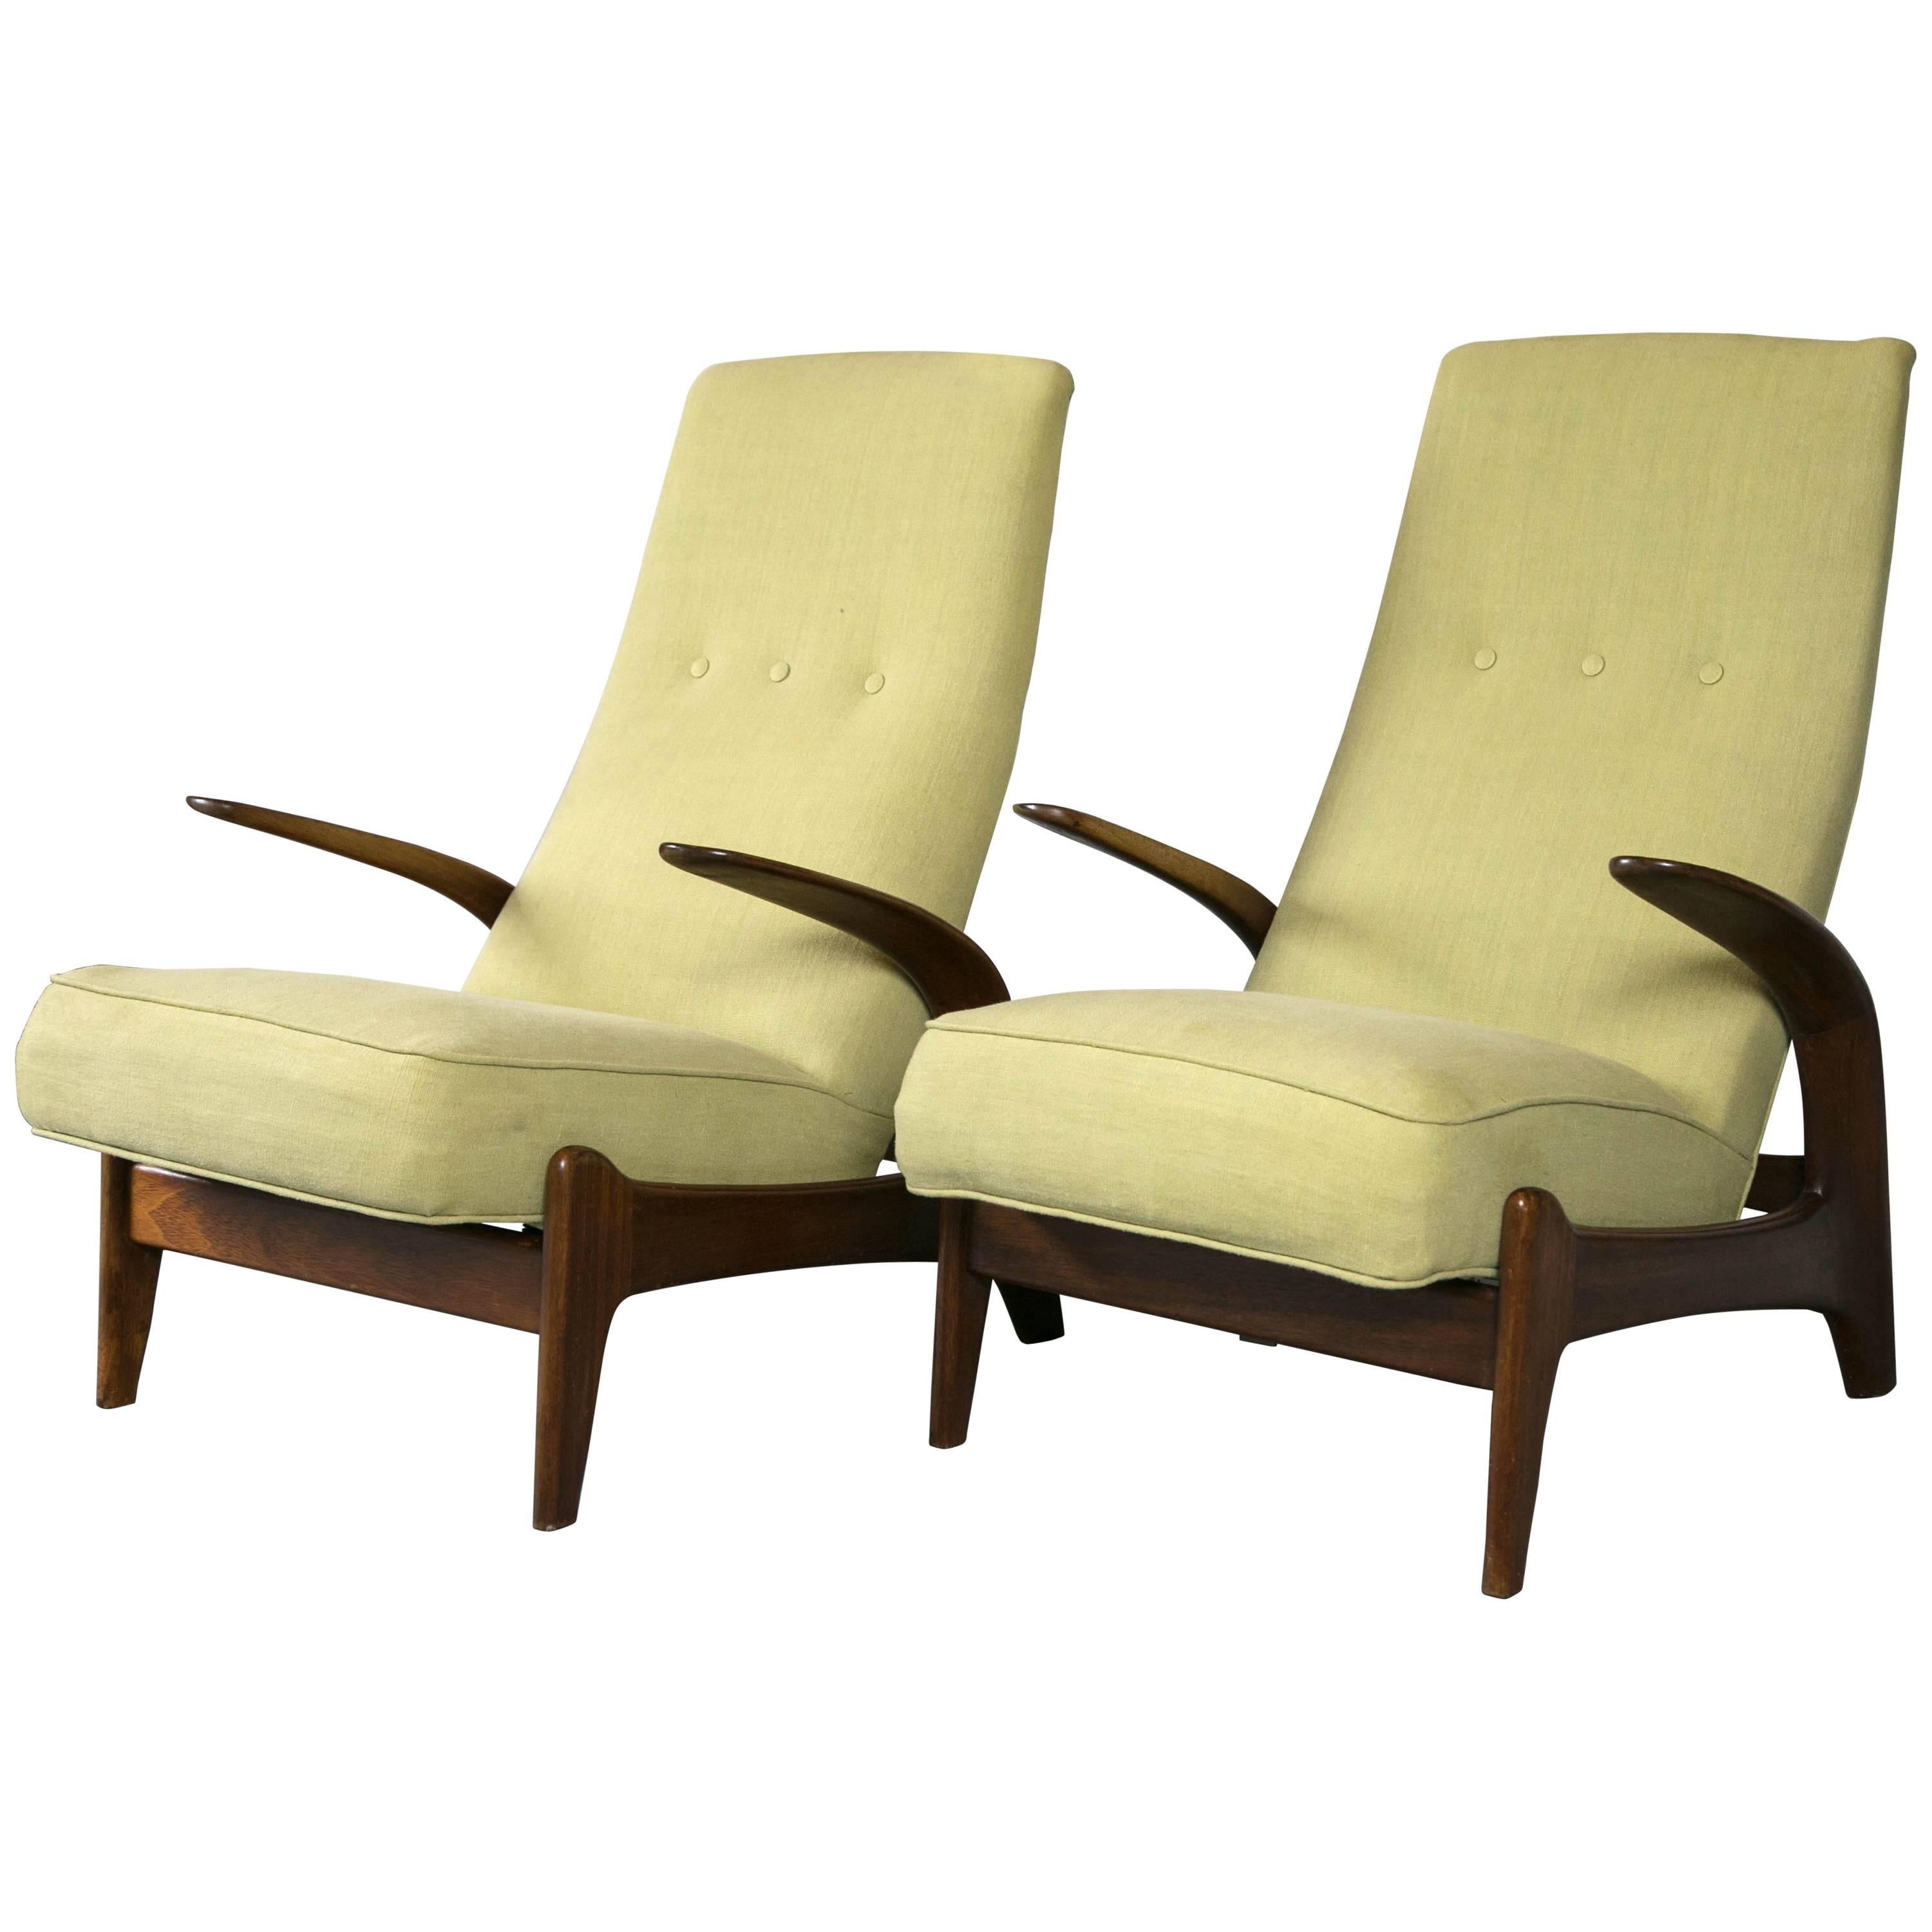 Pair of Gimson & Slater Rock n Rest Chairs